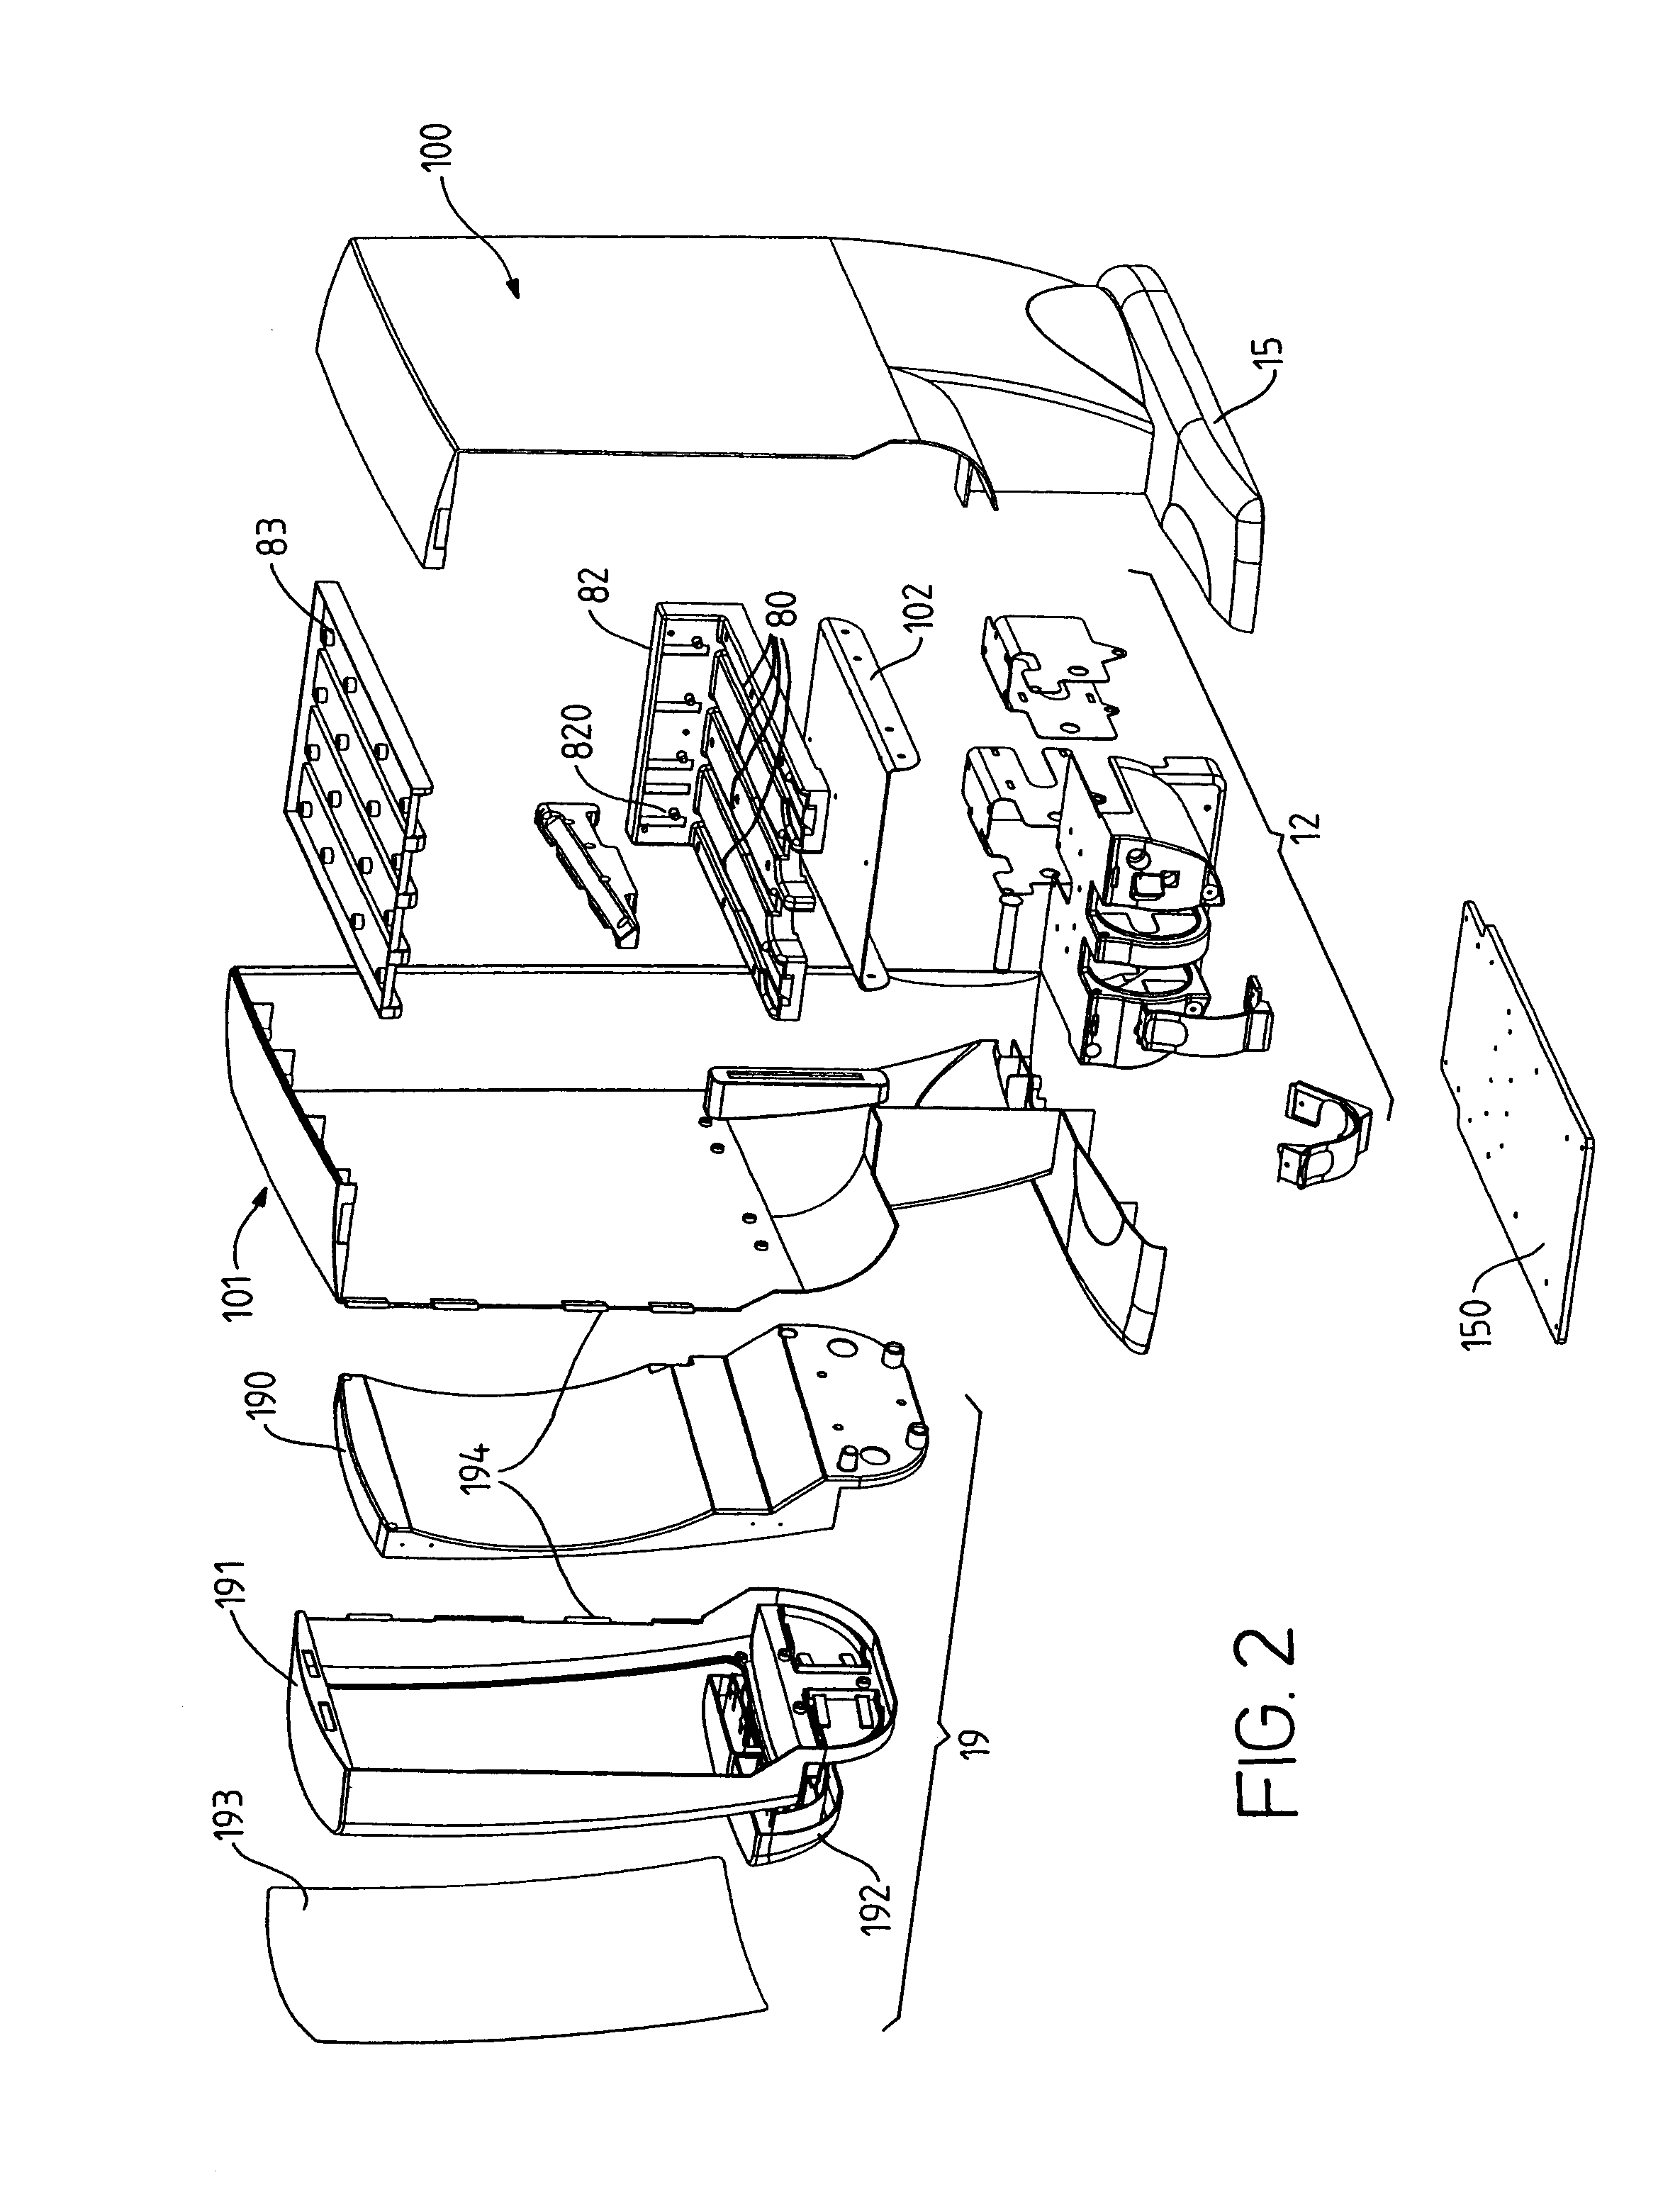 Compartmentalized dispensing device and method for dispensing a flowable product therefrom